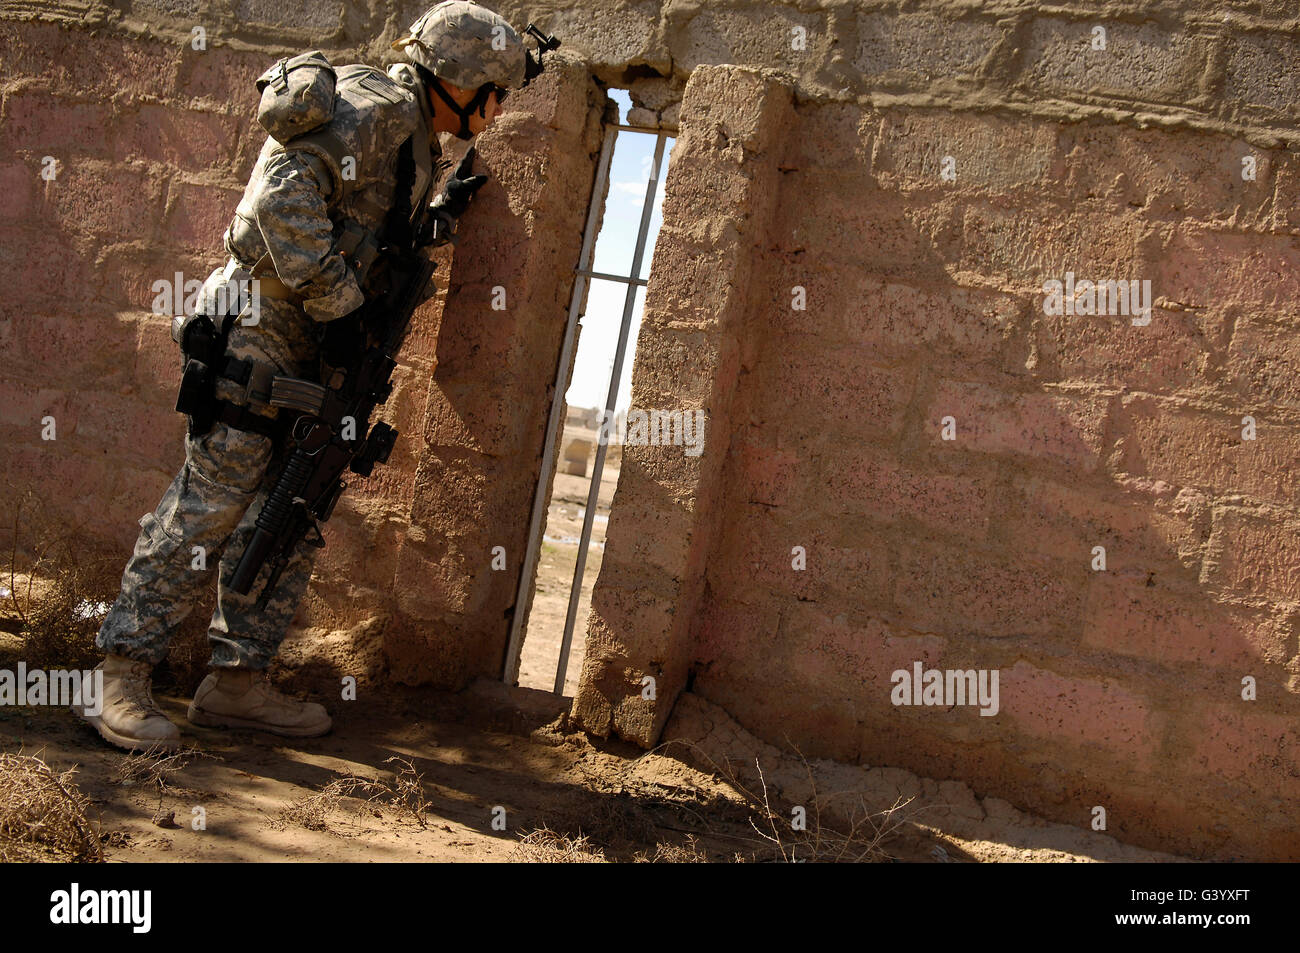 U.S. Army Sergeant looks for a sniper. Stock Photo